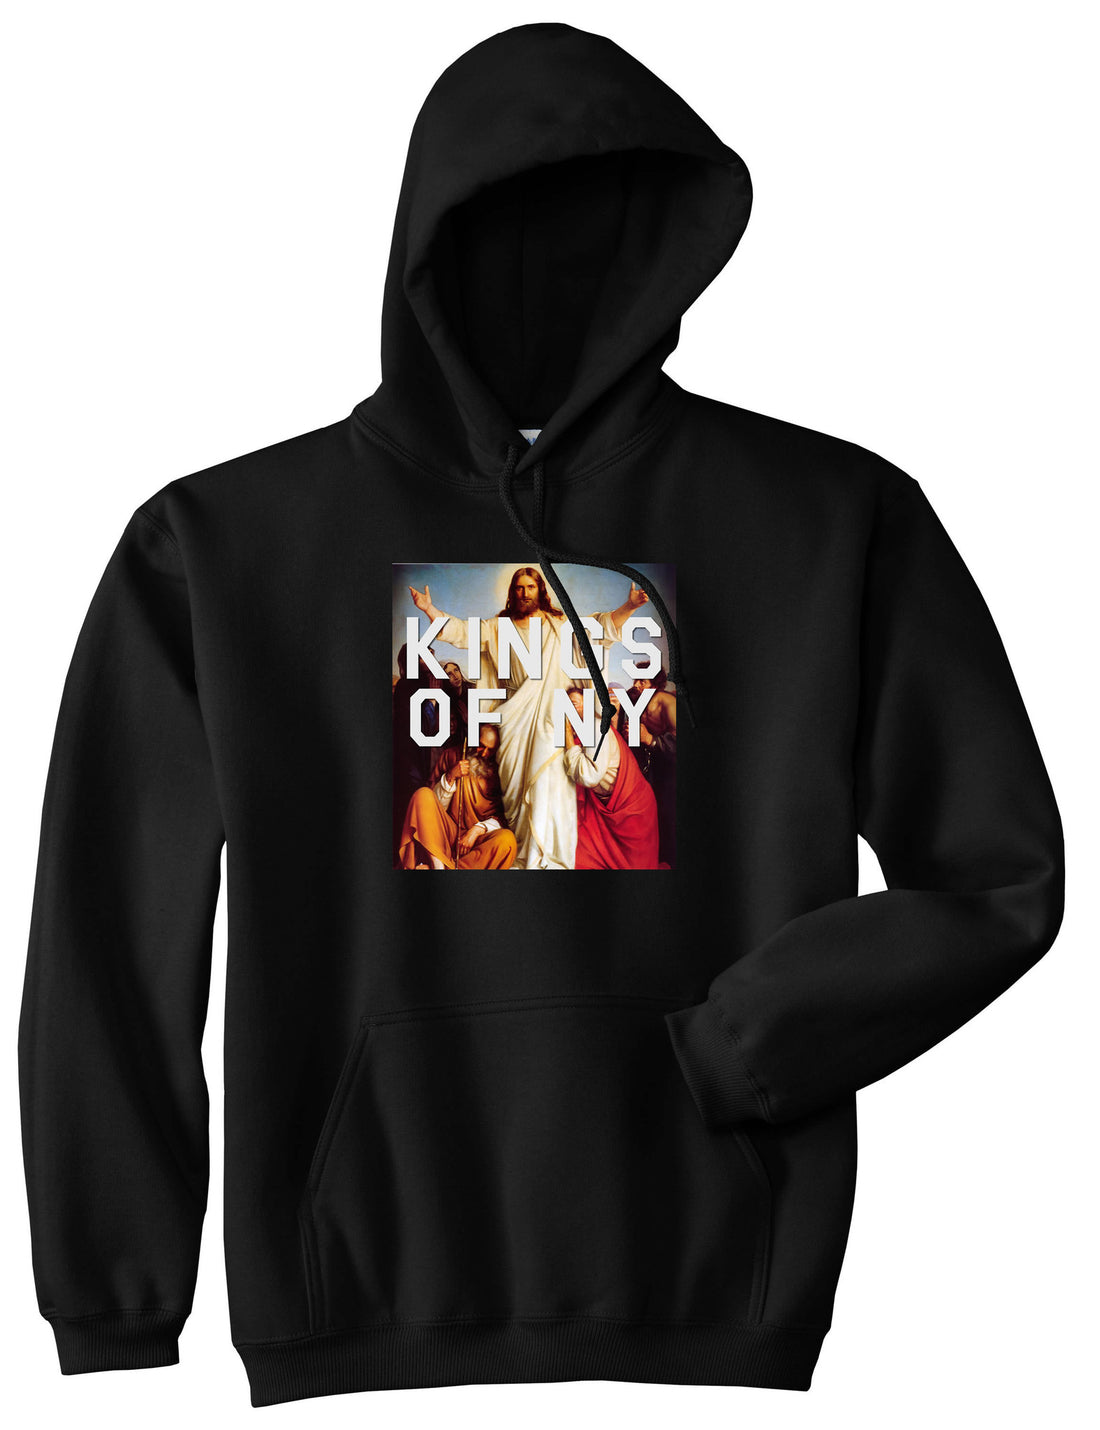 Jesus Worship and Praise of Power Pullover Hoodie in Black By Kings Of NY